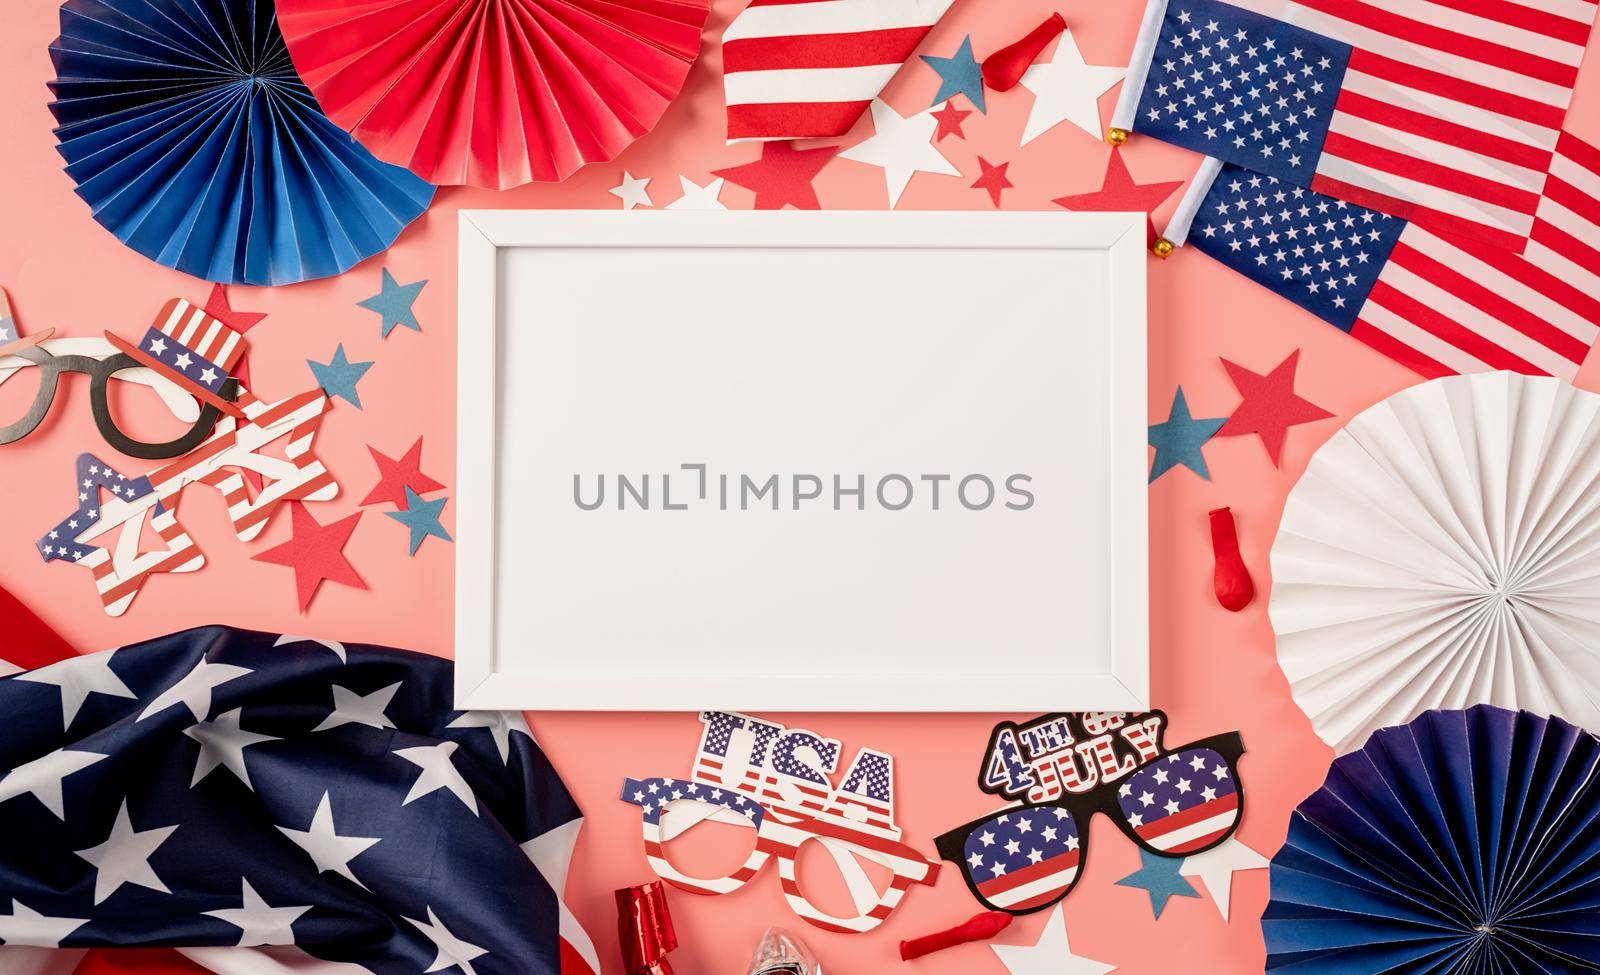 USA Memorial day, Presidents day, Veterans day, Labor day, or 4th of July celebration. White frame for mockup design with USA independence day party element top view flat lay on solid pink background